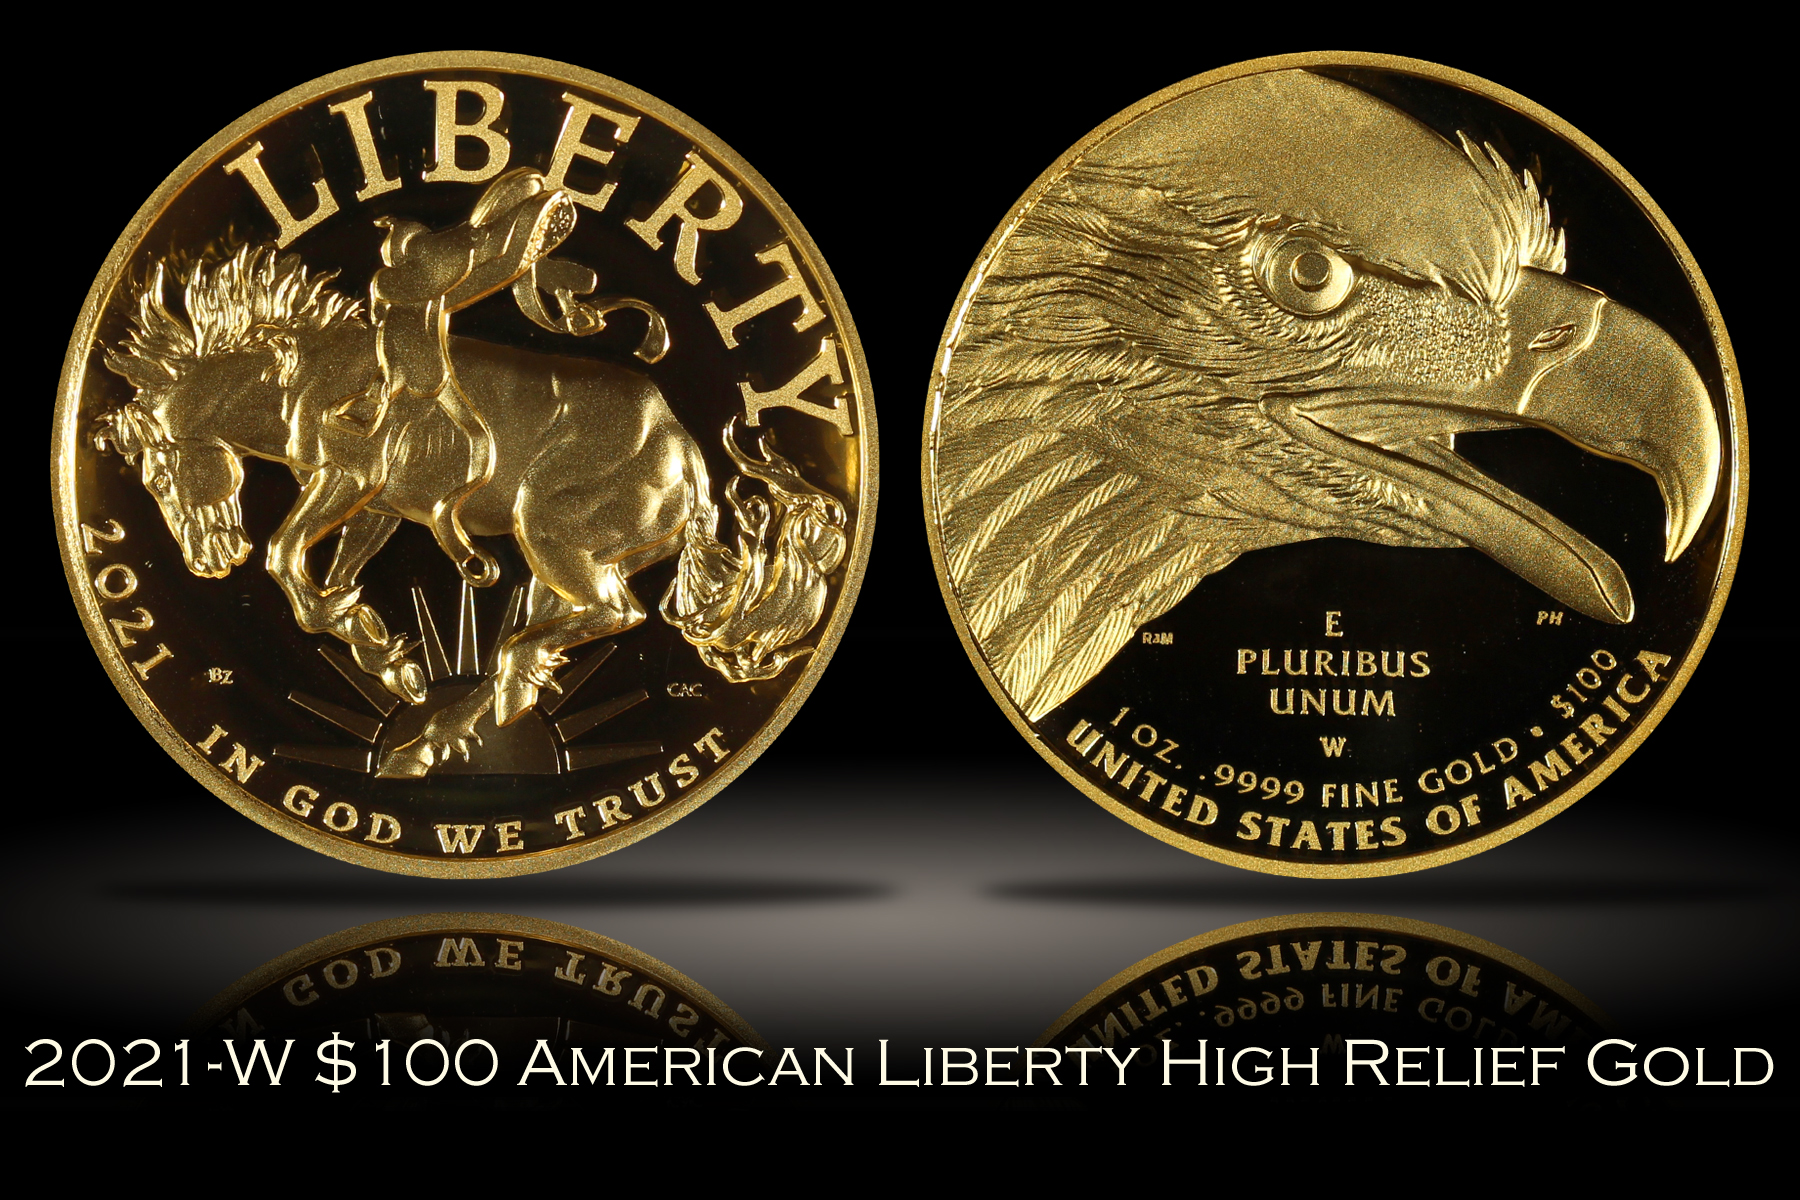 2021-W $100 American Liberty High Relief Gold